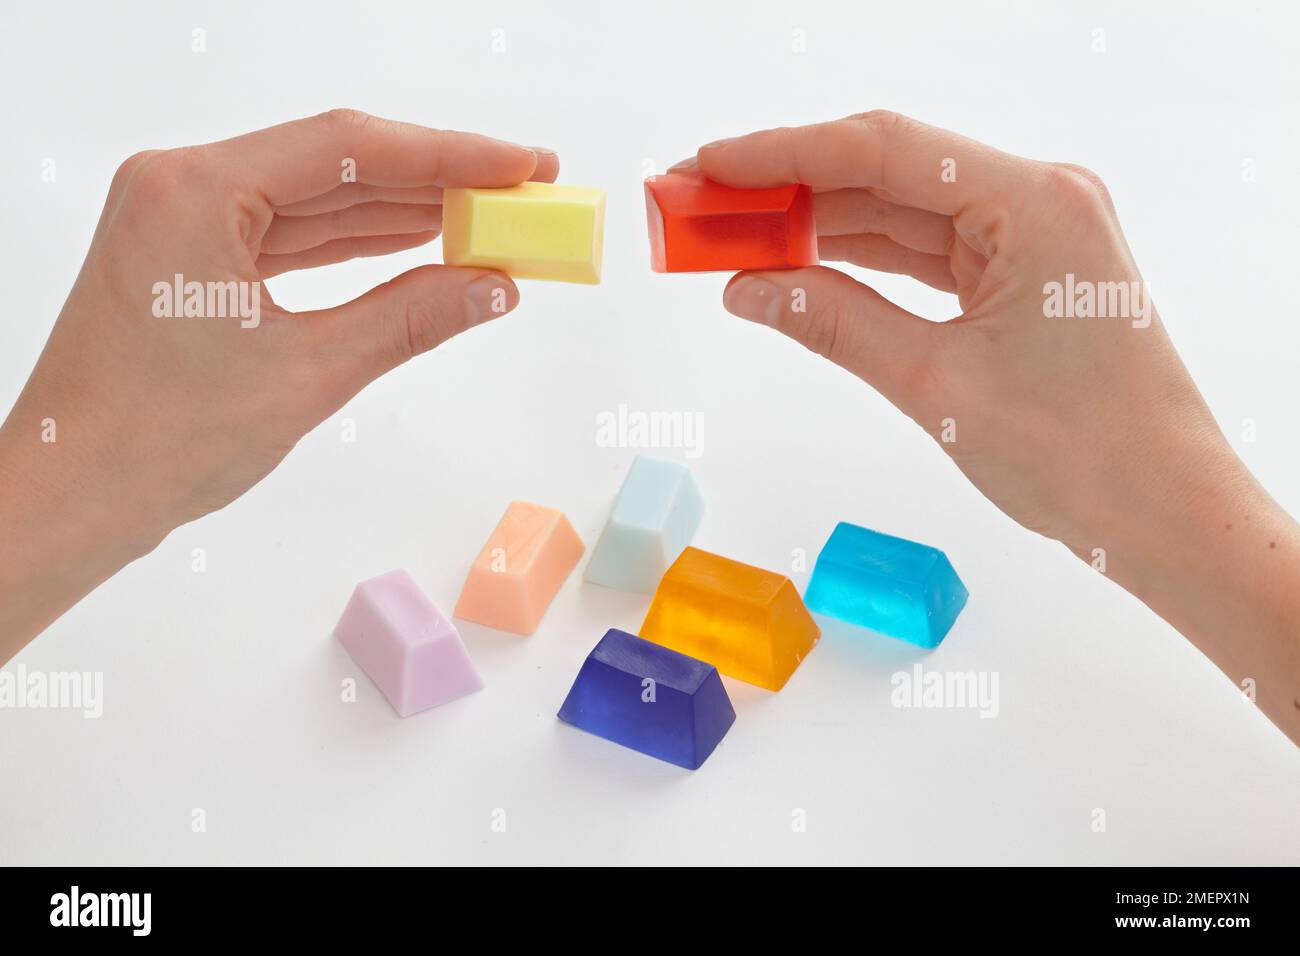 Holding small blocks of opaque and solid colour soap, close-up Stock Photo